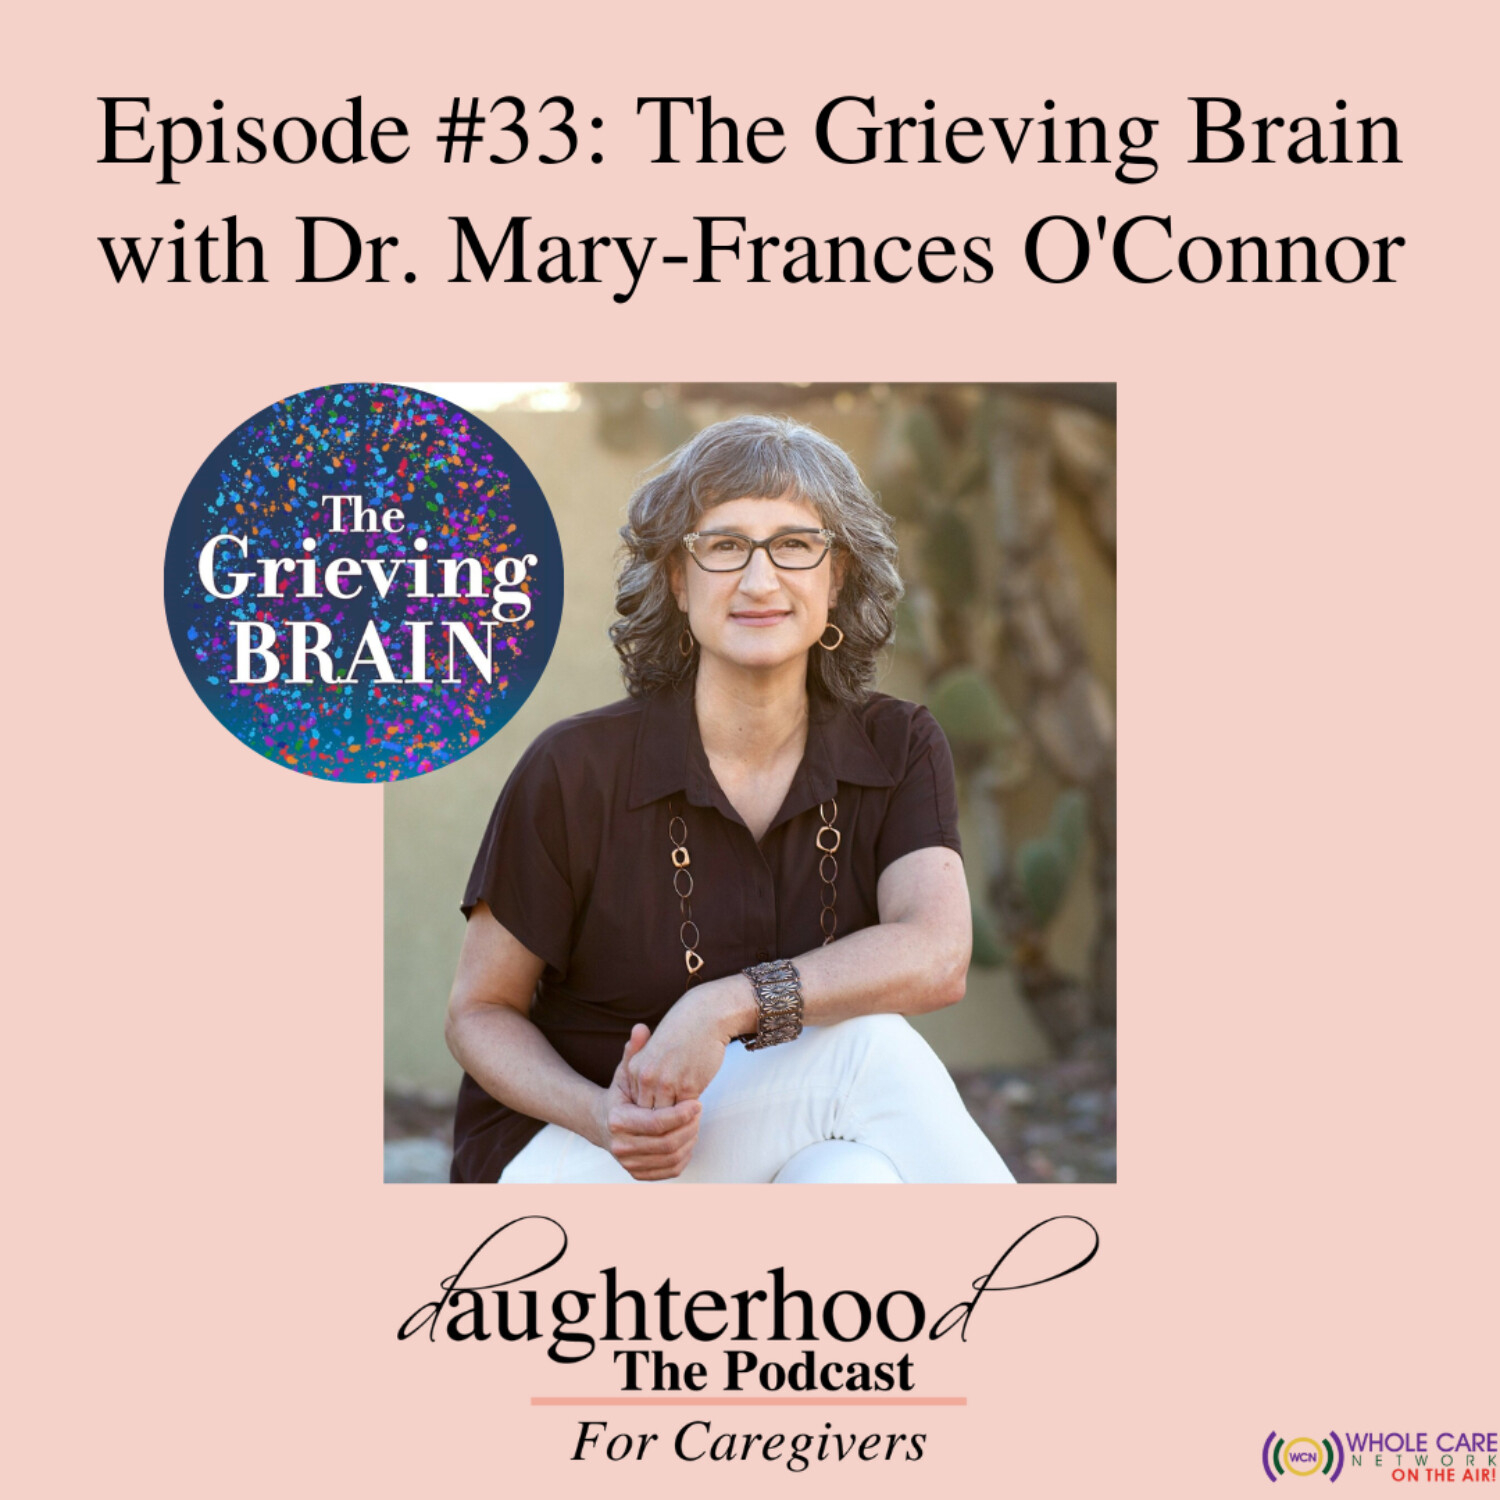 The Grieving Brain with Dr Mary-Frances O'Connor